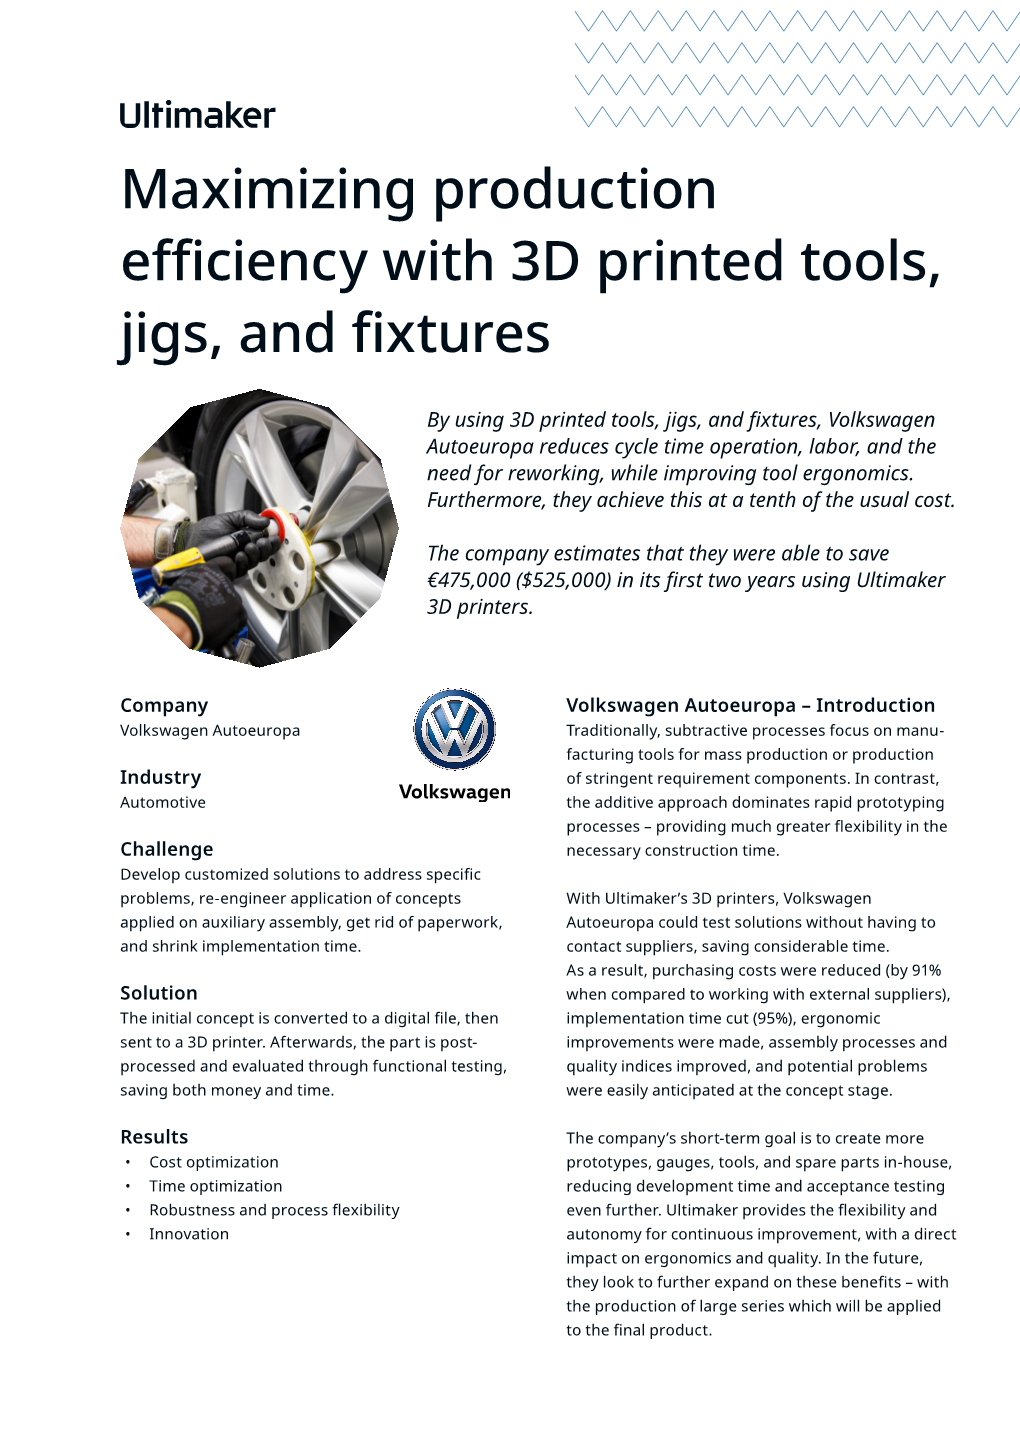 Volkswagen Autoeuropa: Maximizing Production Efficiency with 3D